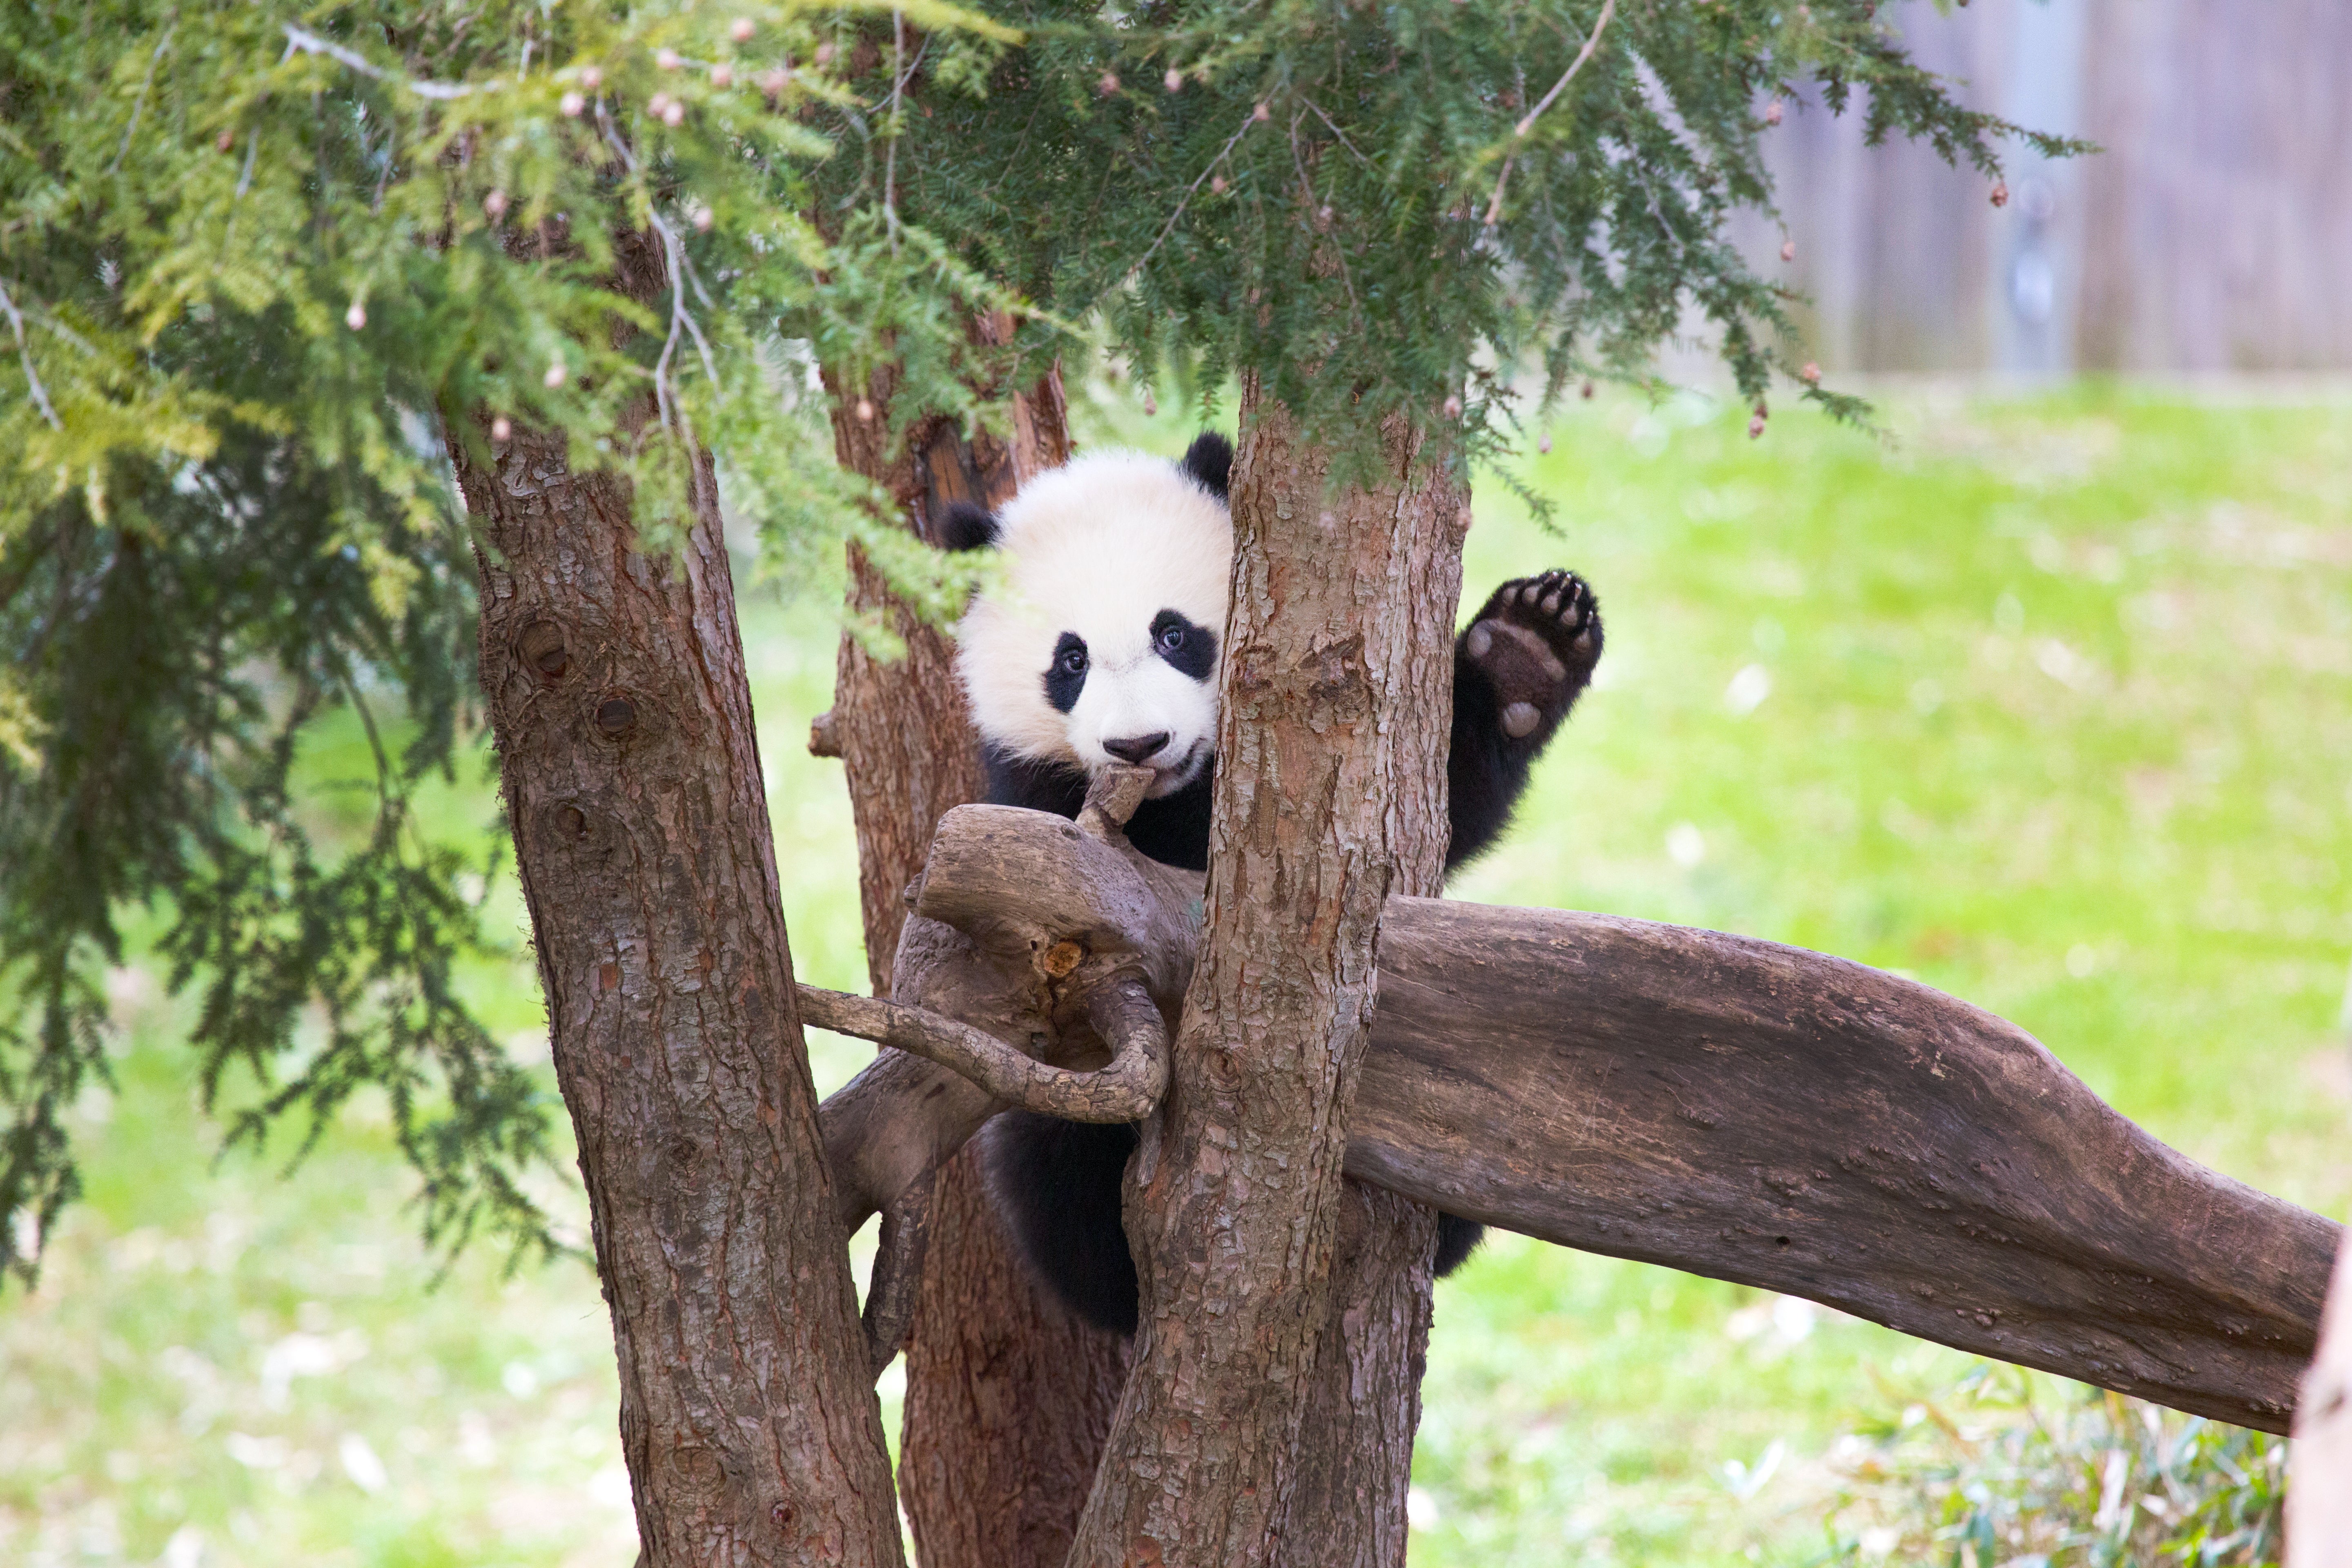 Giant panda Bei Bei sits in a tree appearing to wave